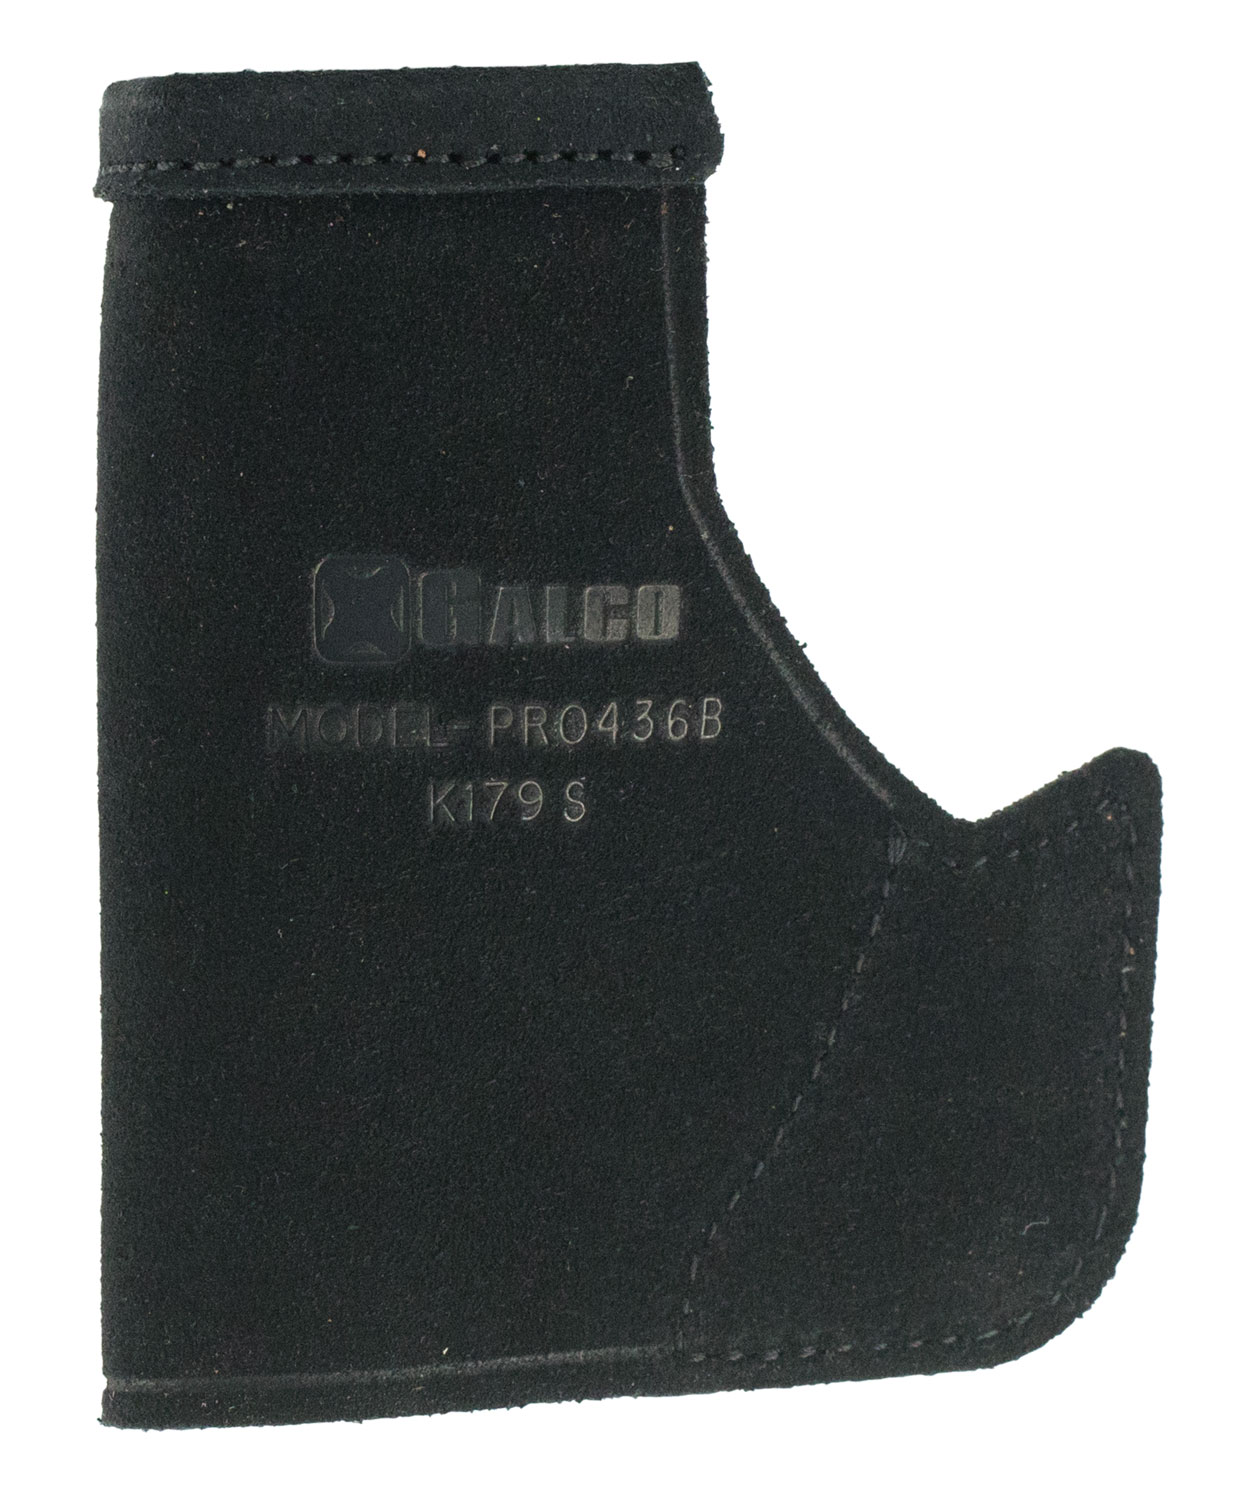 Galco PRO436B Pocket Protector  Black Leather Ruger LCP Right Hand